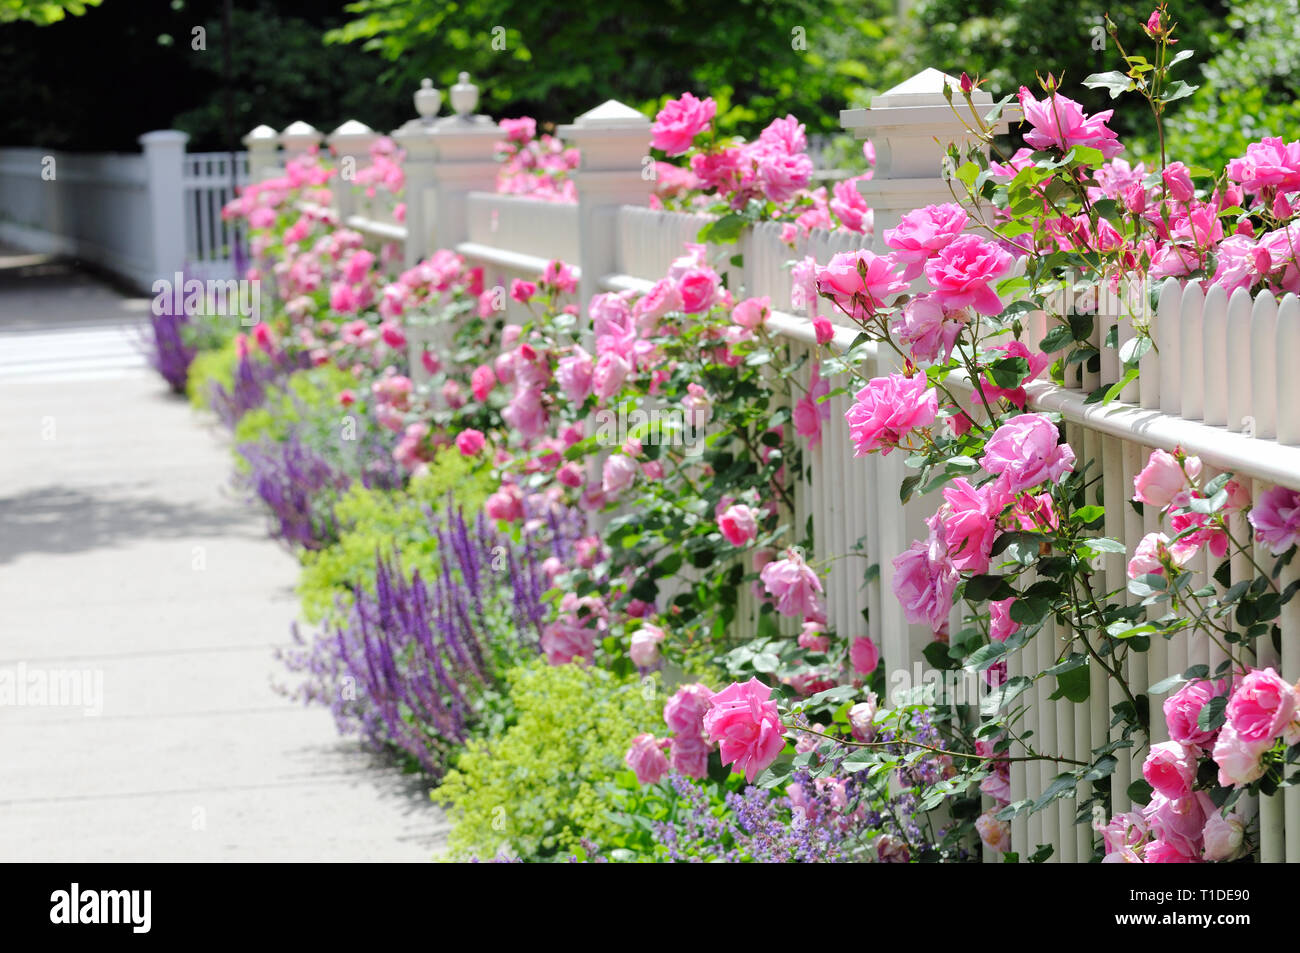 White wooden fence, pink roses, colorful garden border adding curb appeal to home entrance Stock Photo